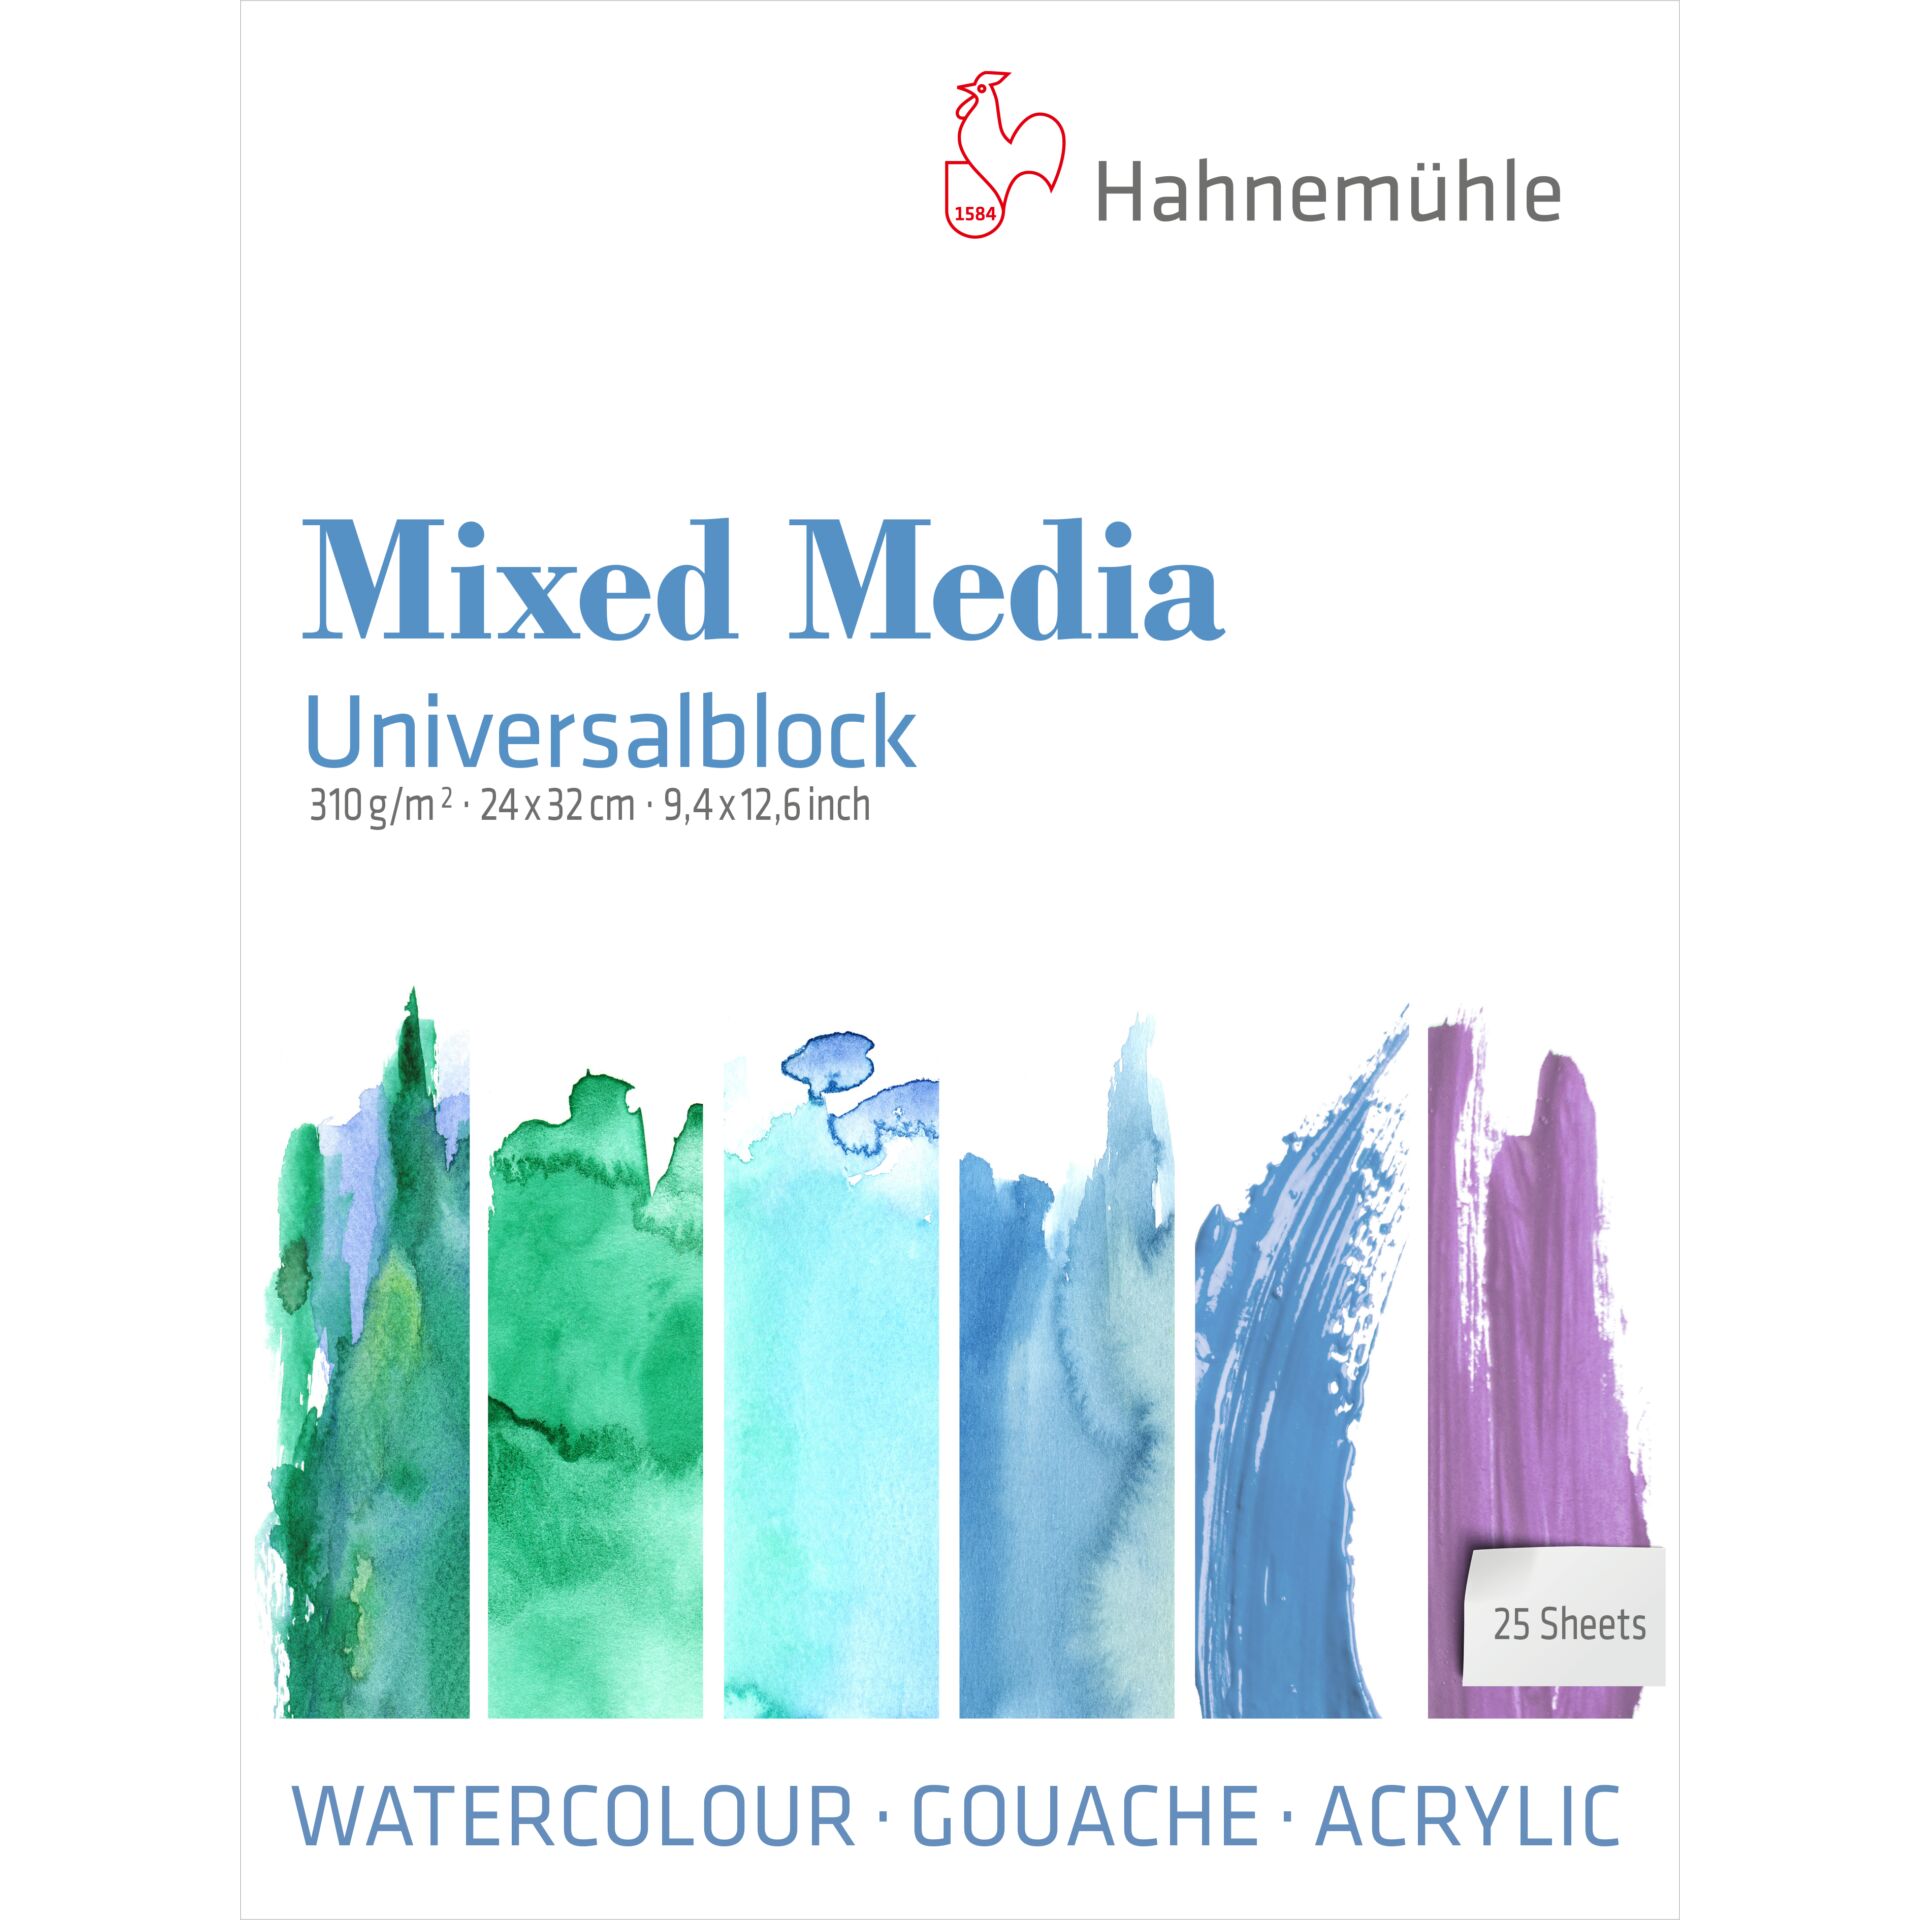 Hahnemühle Mixed Media Universal Pad 25 sheets  24x32 cm  31